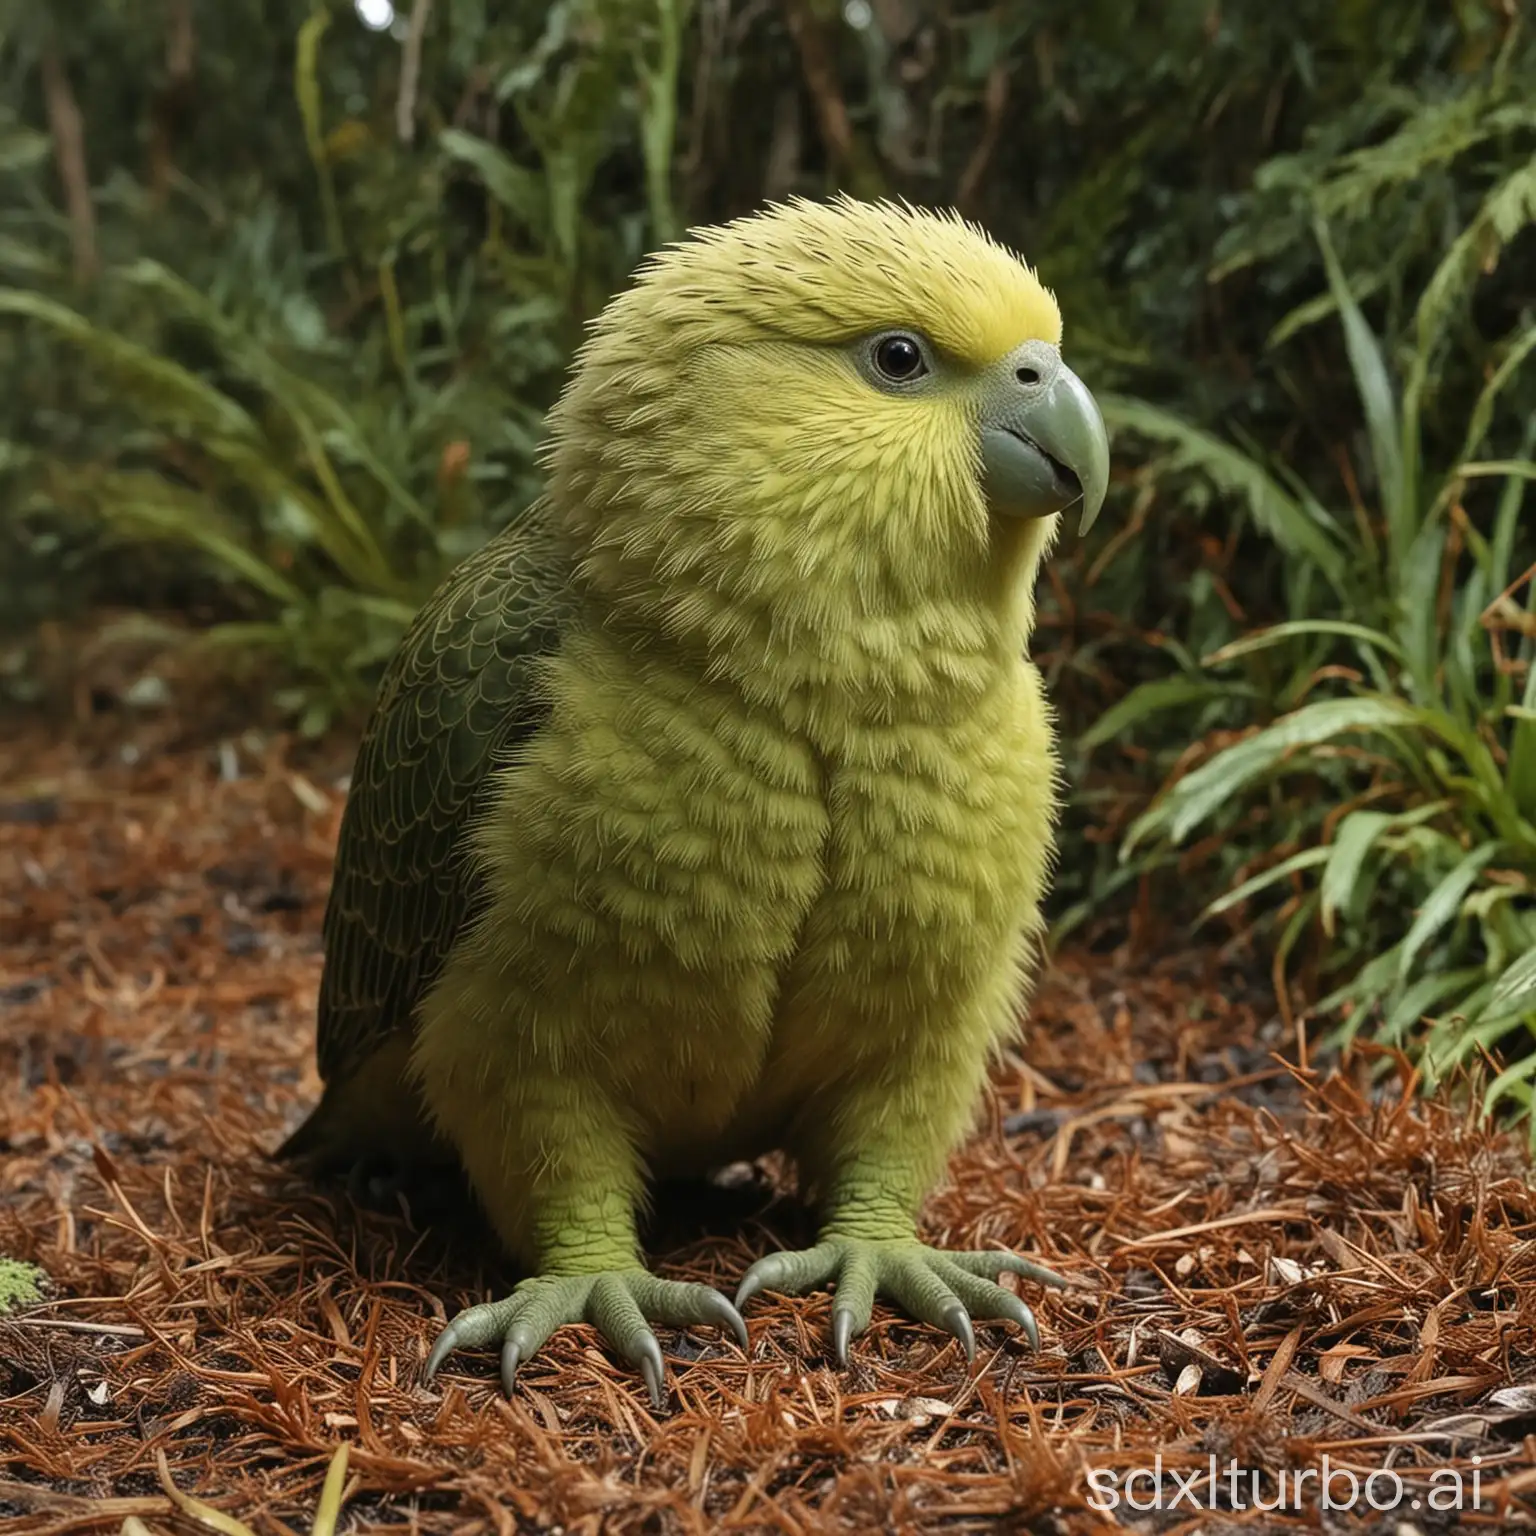 Colorful-Kakapo-Parrot-Perched-on-Branch-in-Tropical-Forest